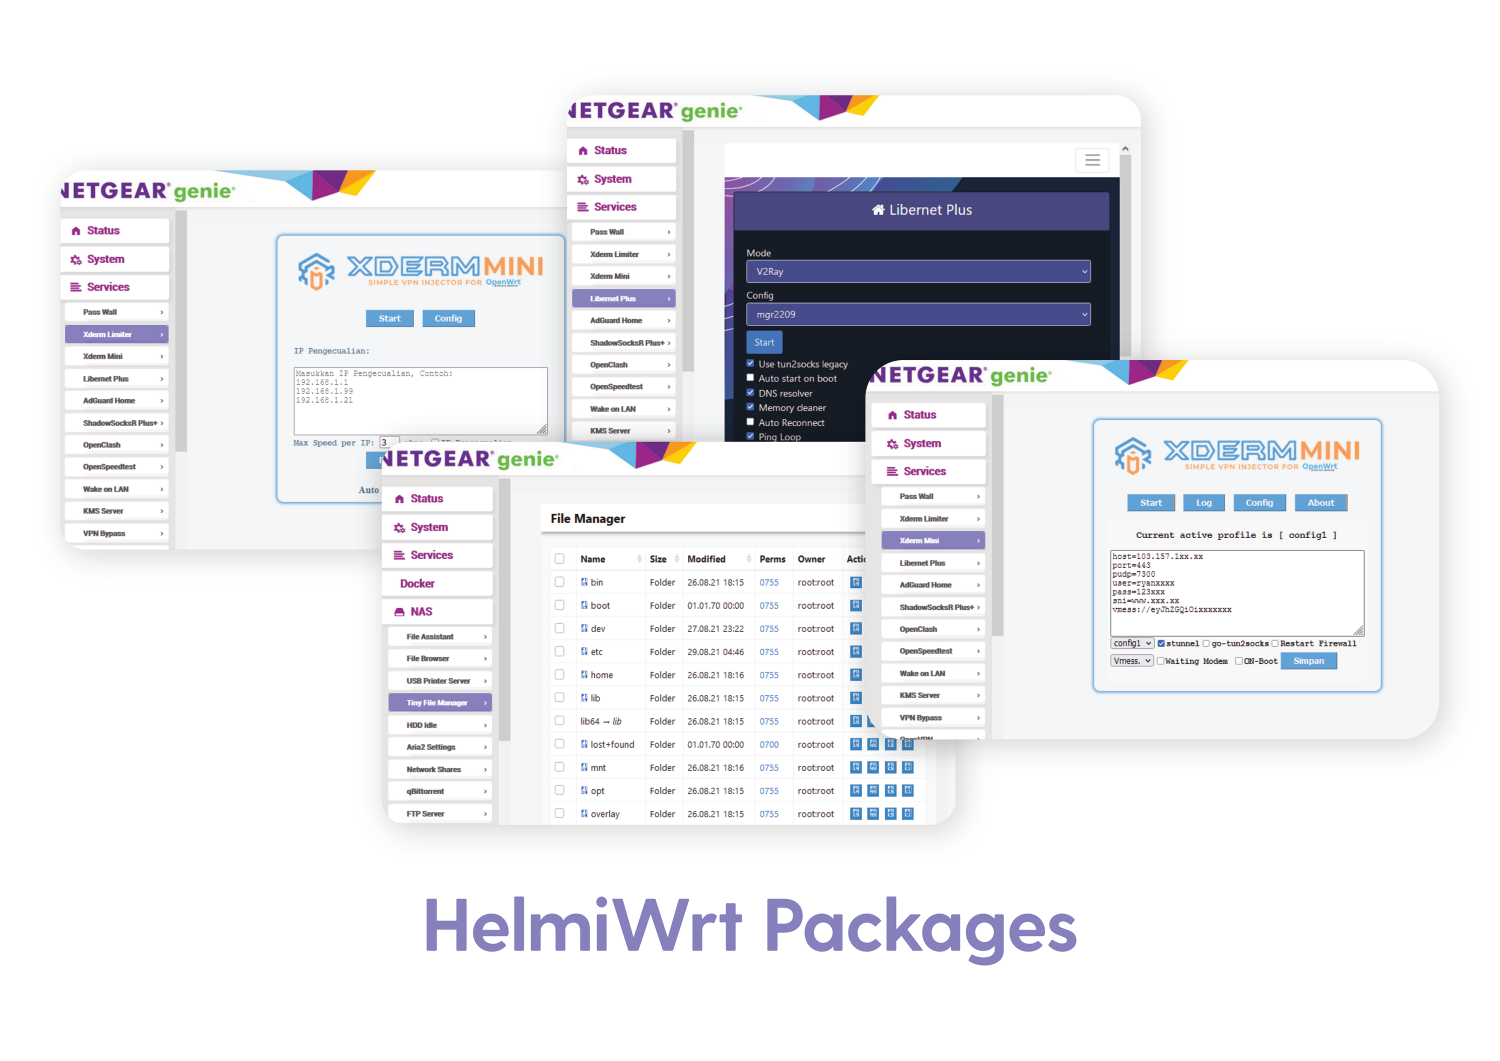 OpenWrt - HelmiWrt LuCI App Packages